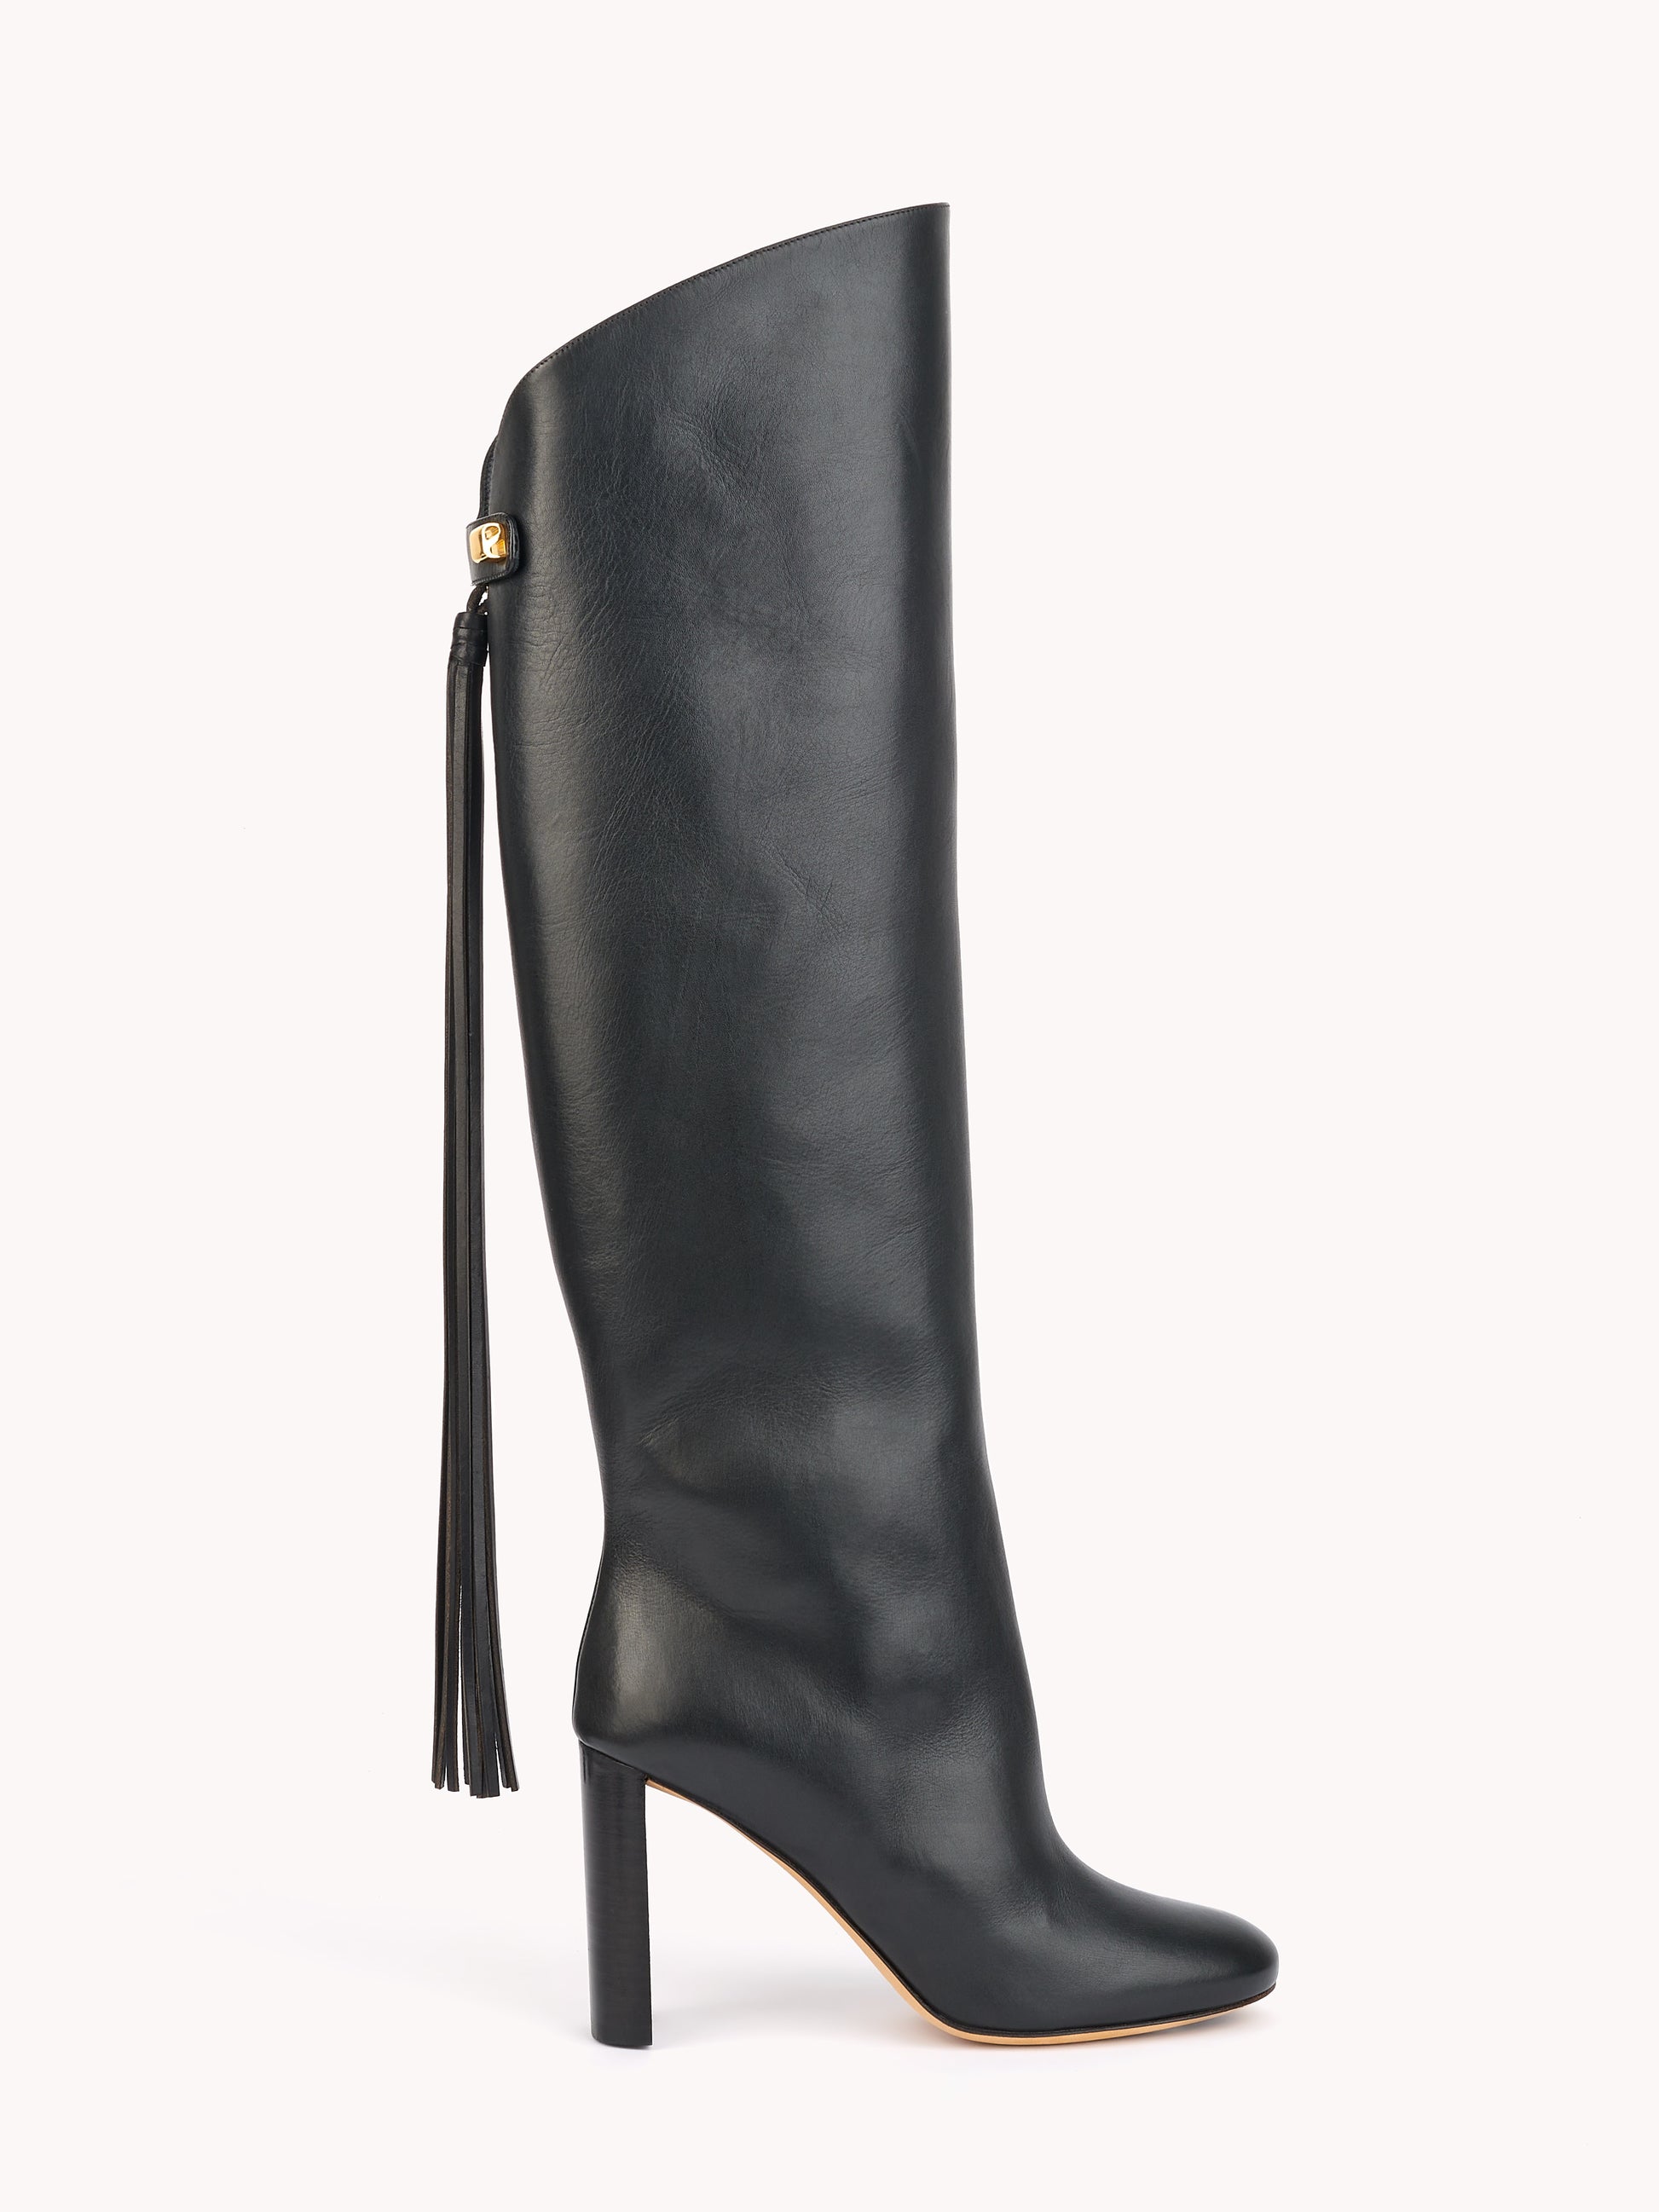 luxury equestrian black leather boots with high heels skorpios